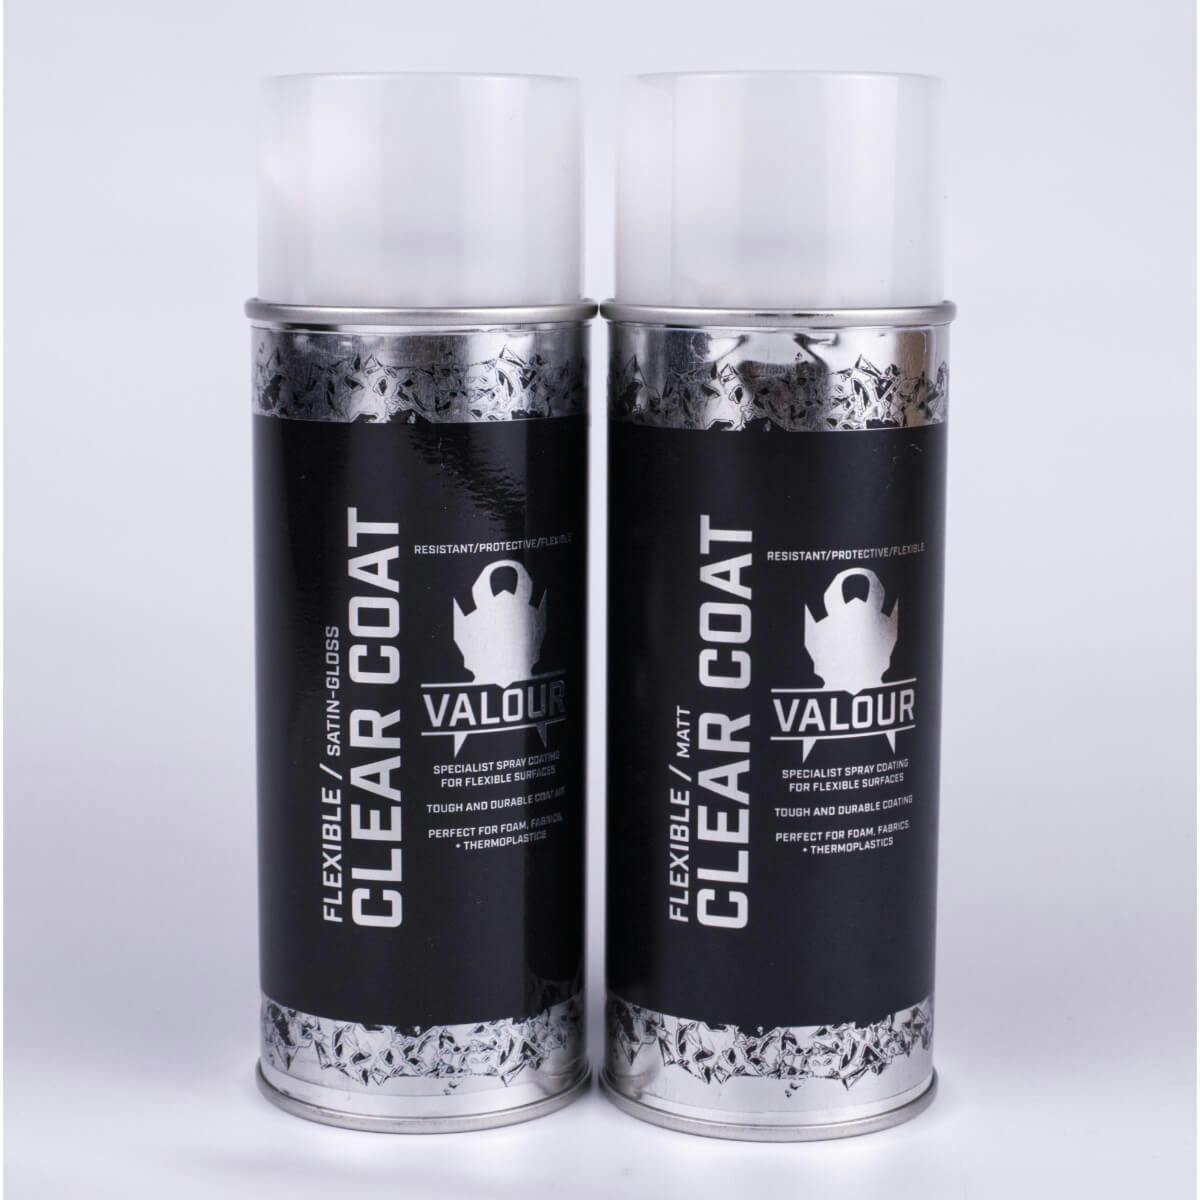 Spray cans of Valour with matt and satin gloss effect on white background